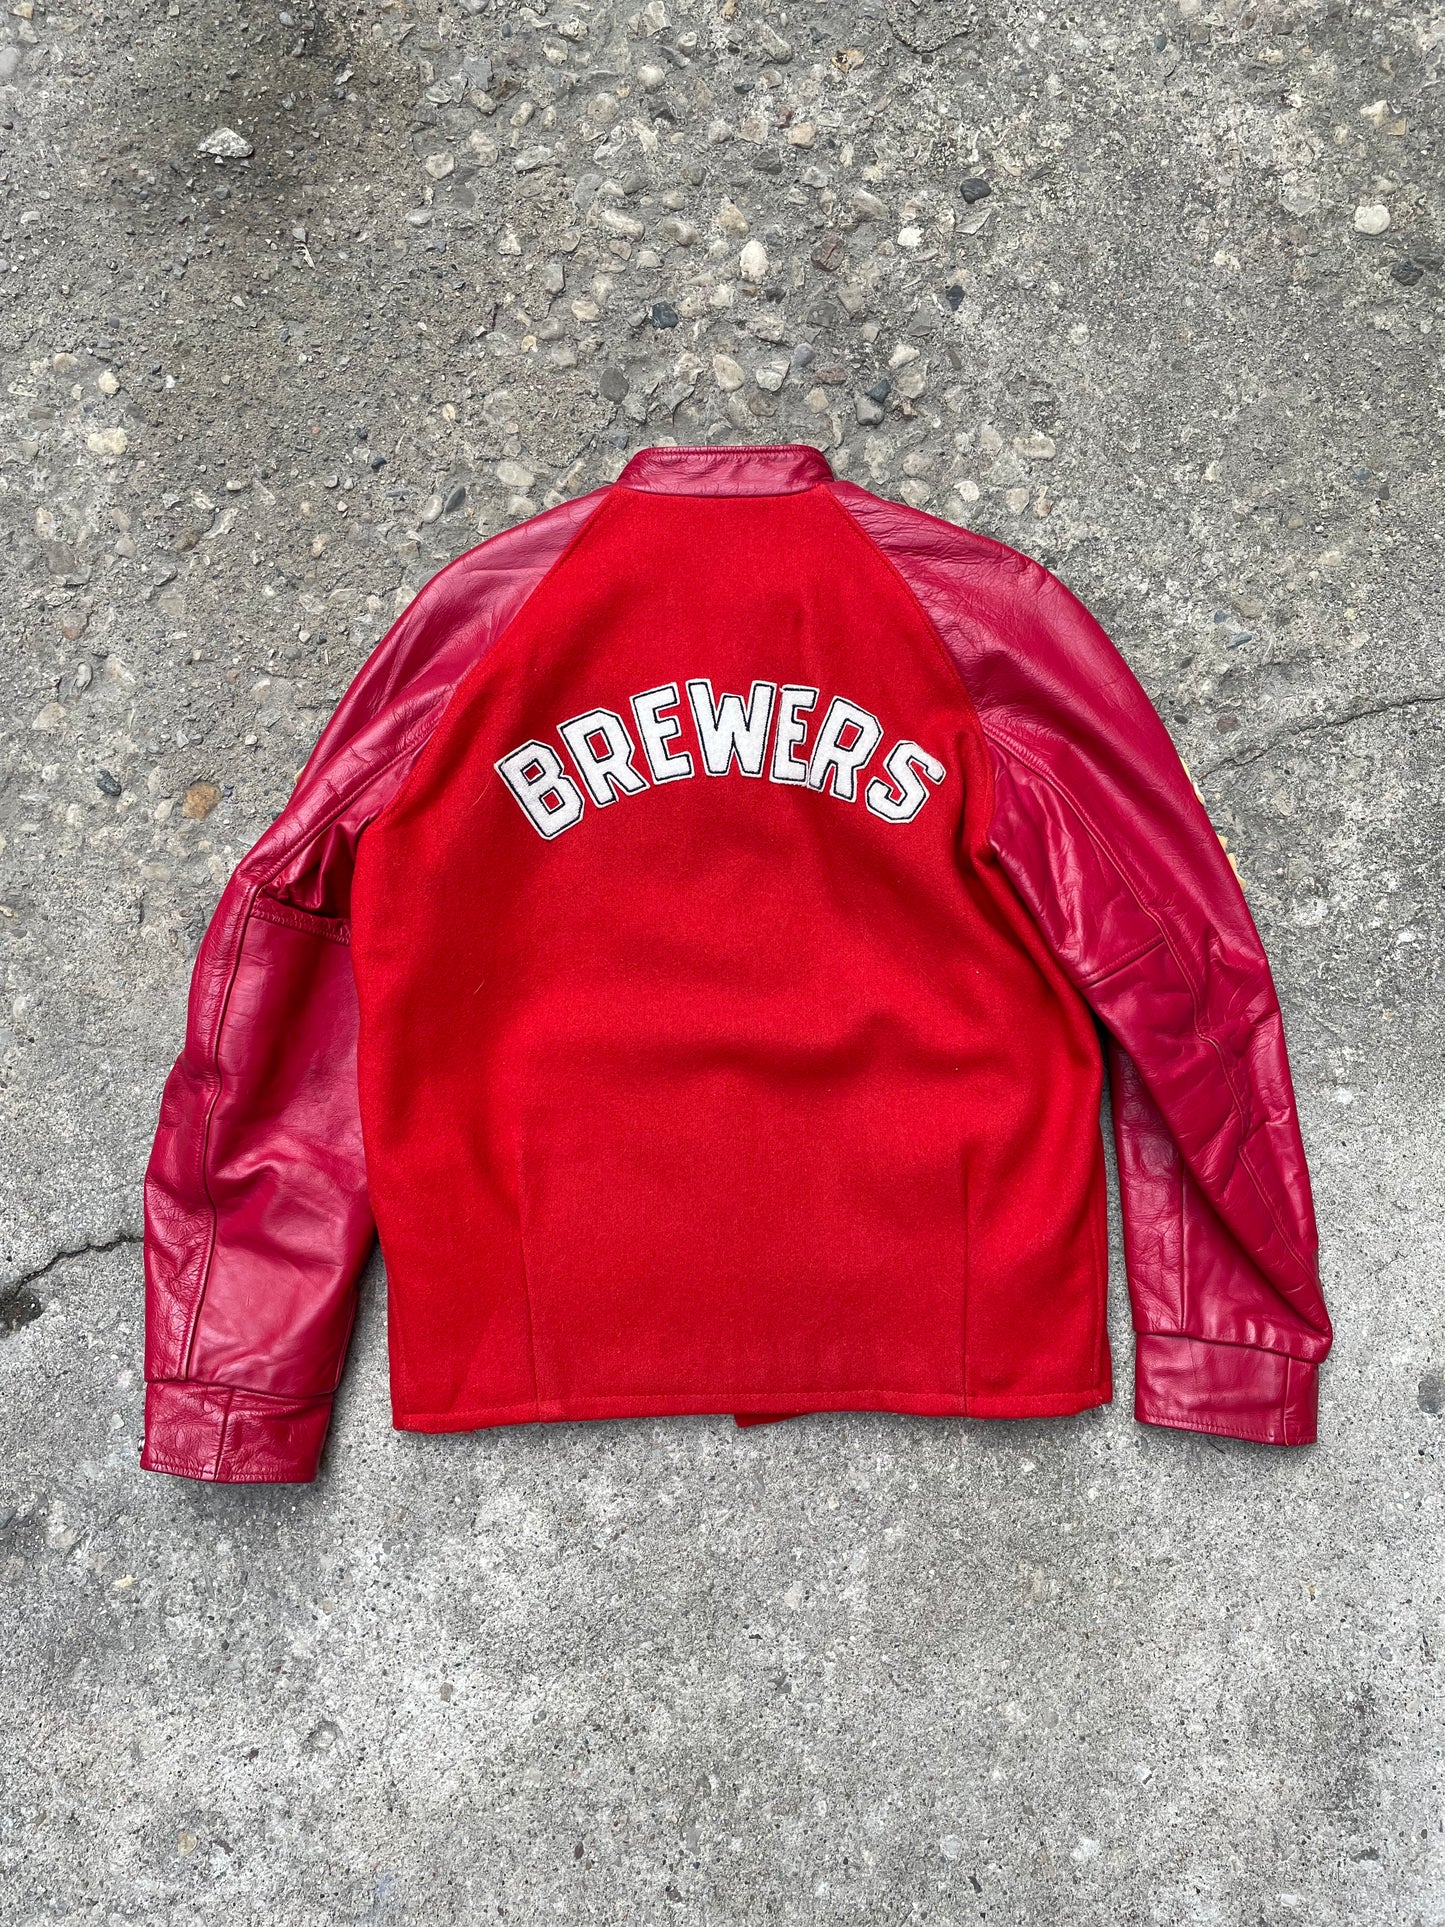 1960's/1970's Maryhill Brewers Leather & Wool Varsity Jacket - L